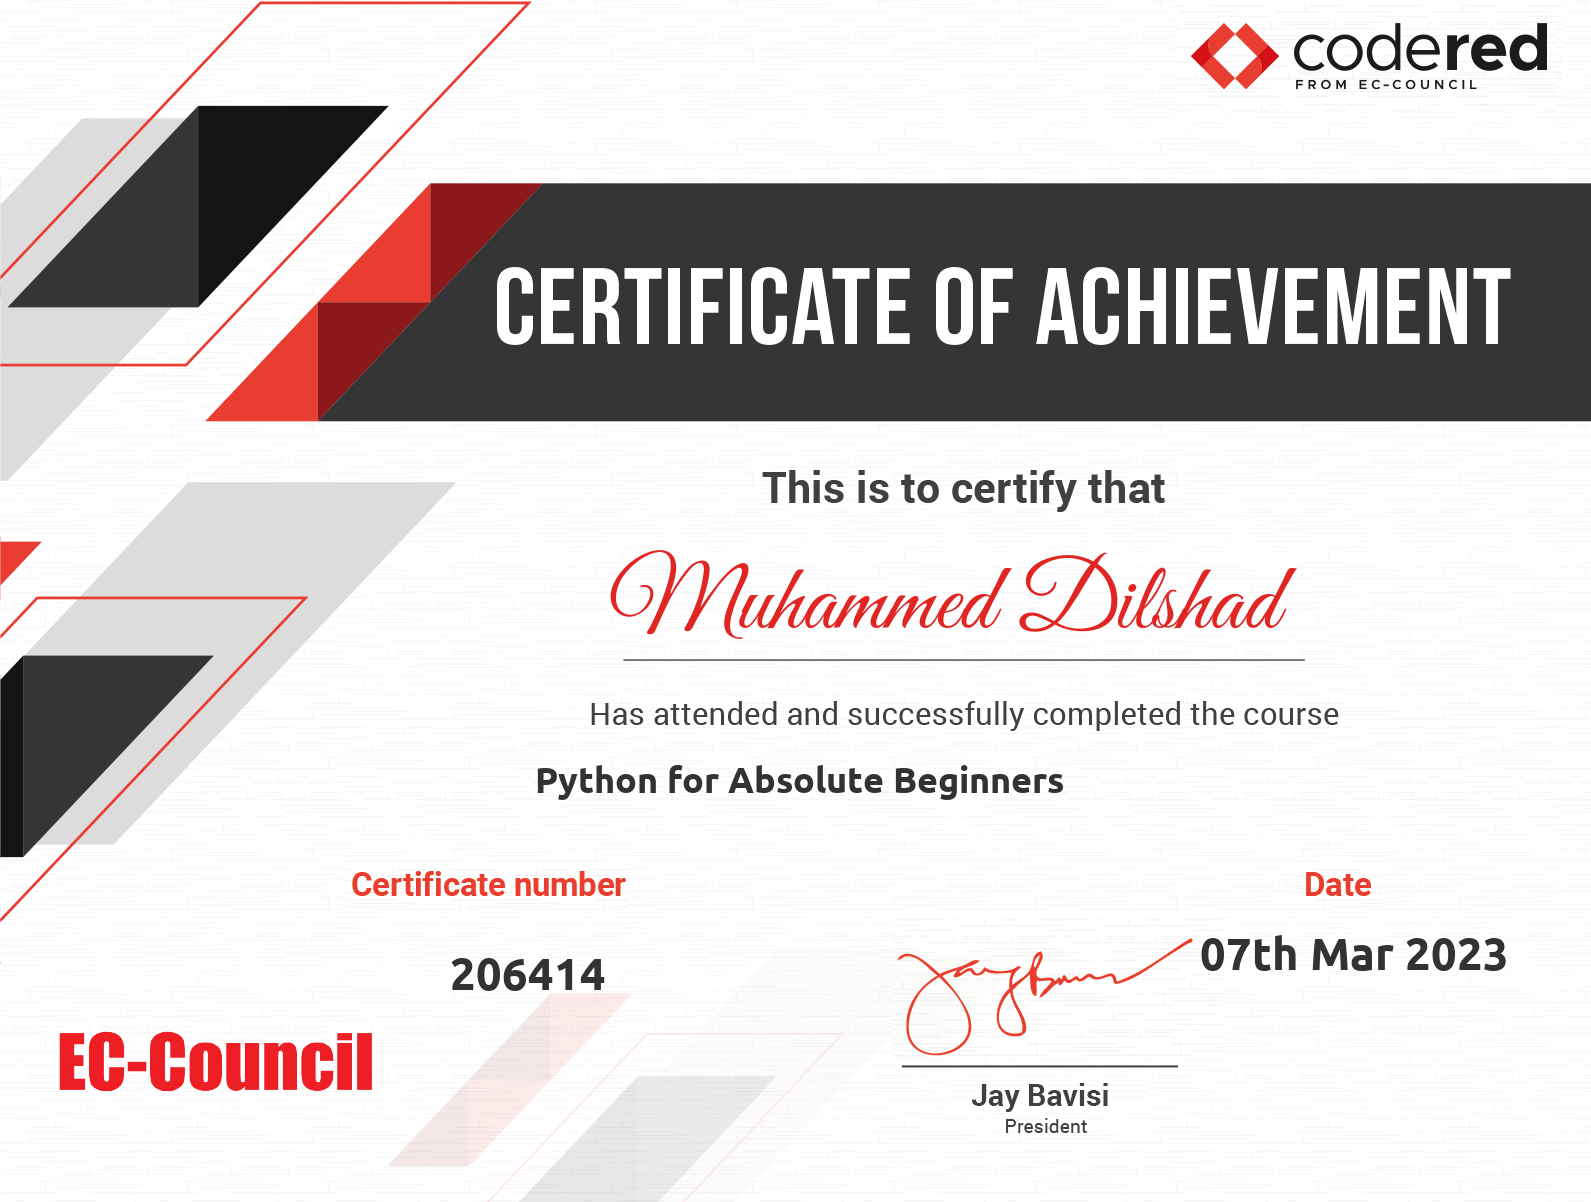 couNciL

&gt; CERTIFICATE OF ACHIEVEMENT

This is to certify that

# O)Nlitemmed Dilstad

Has attended and successfully completed the course
Python for Absolute Beginners
Certificate number Date

206414 SE Mar 2023

Jay Bavisi

President